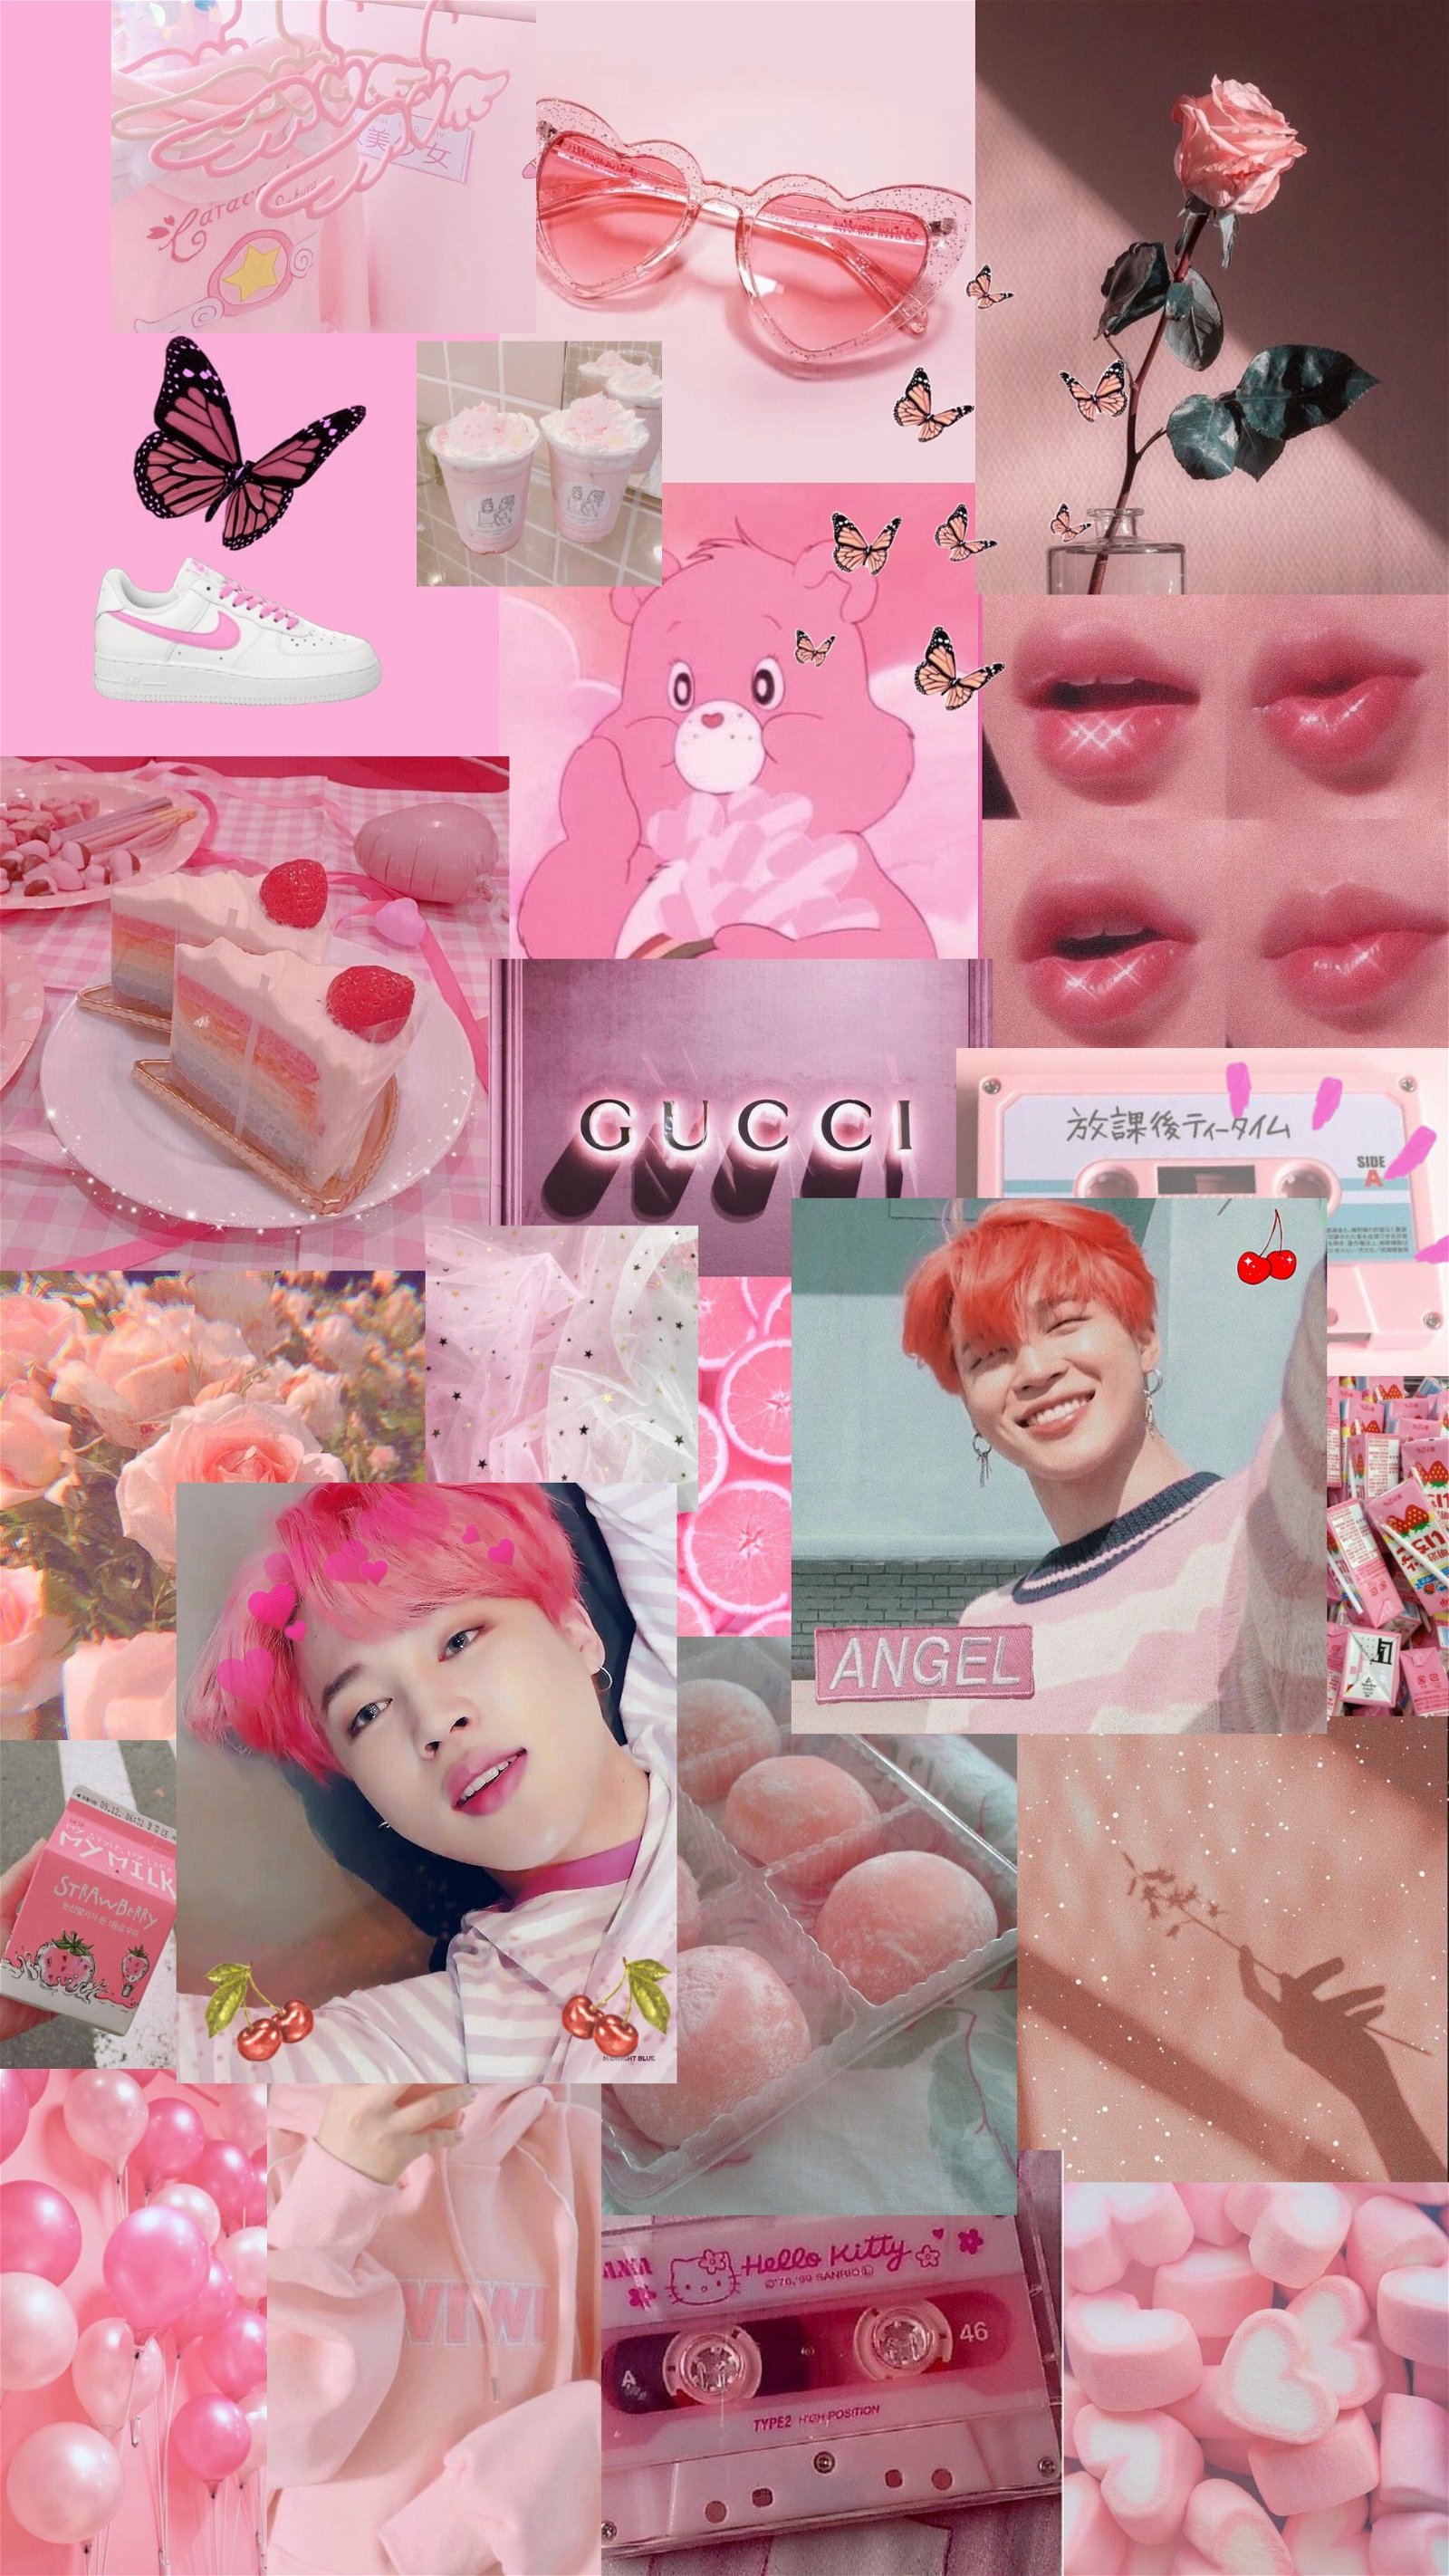 Jimin aesthetic wallpaper by ZoeSaw  Download on ZEDGE  9e16